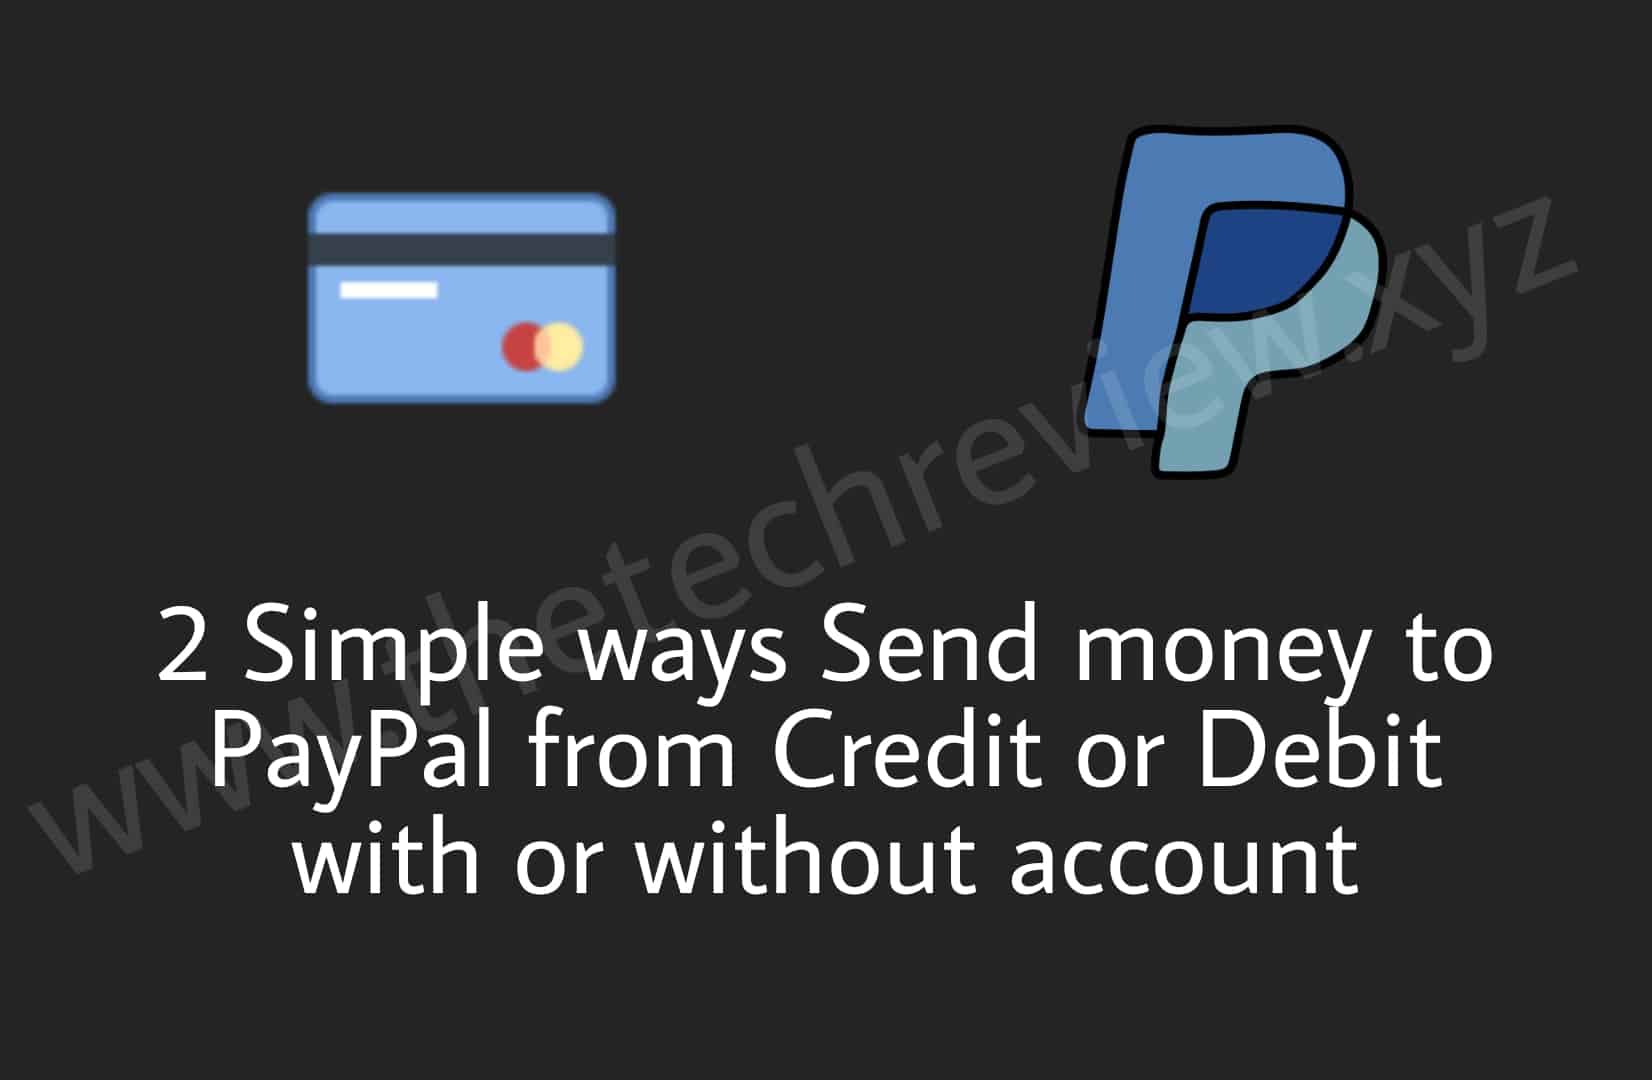 Send money to PayPal from Credit or Debit card with or without account